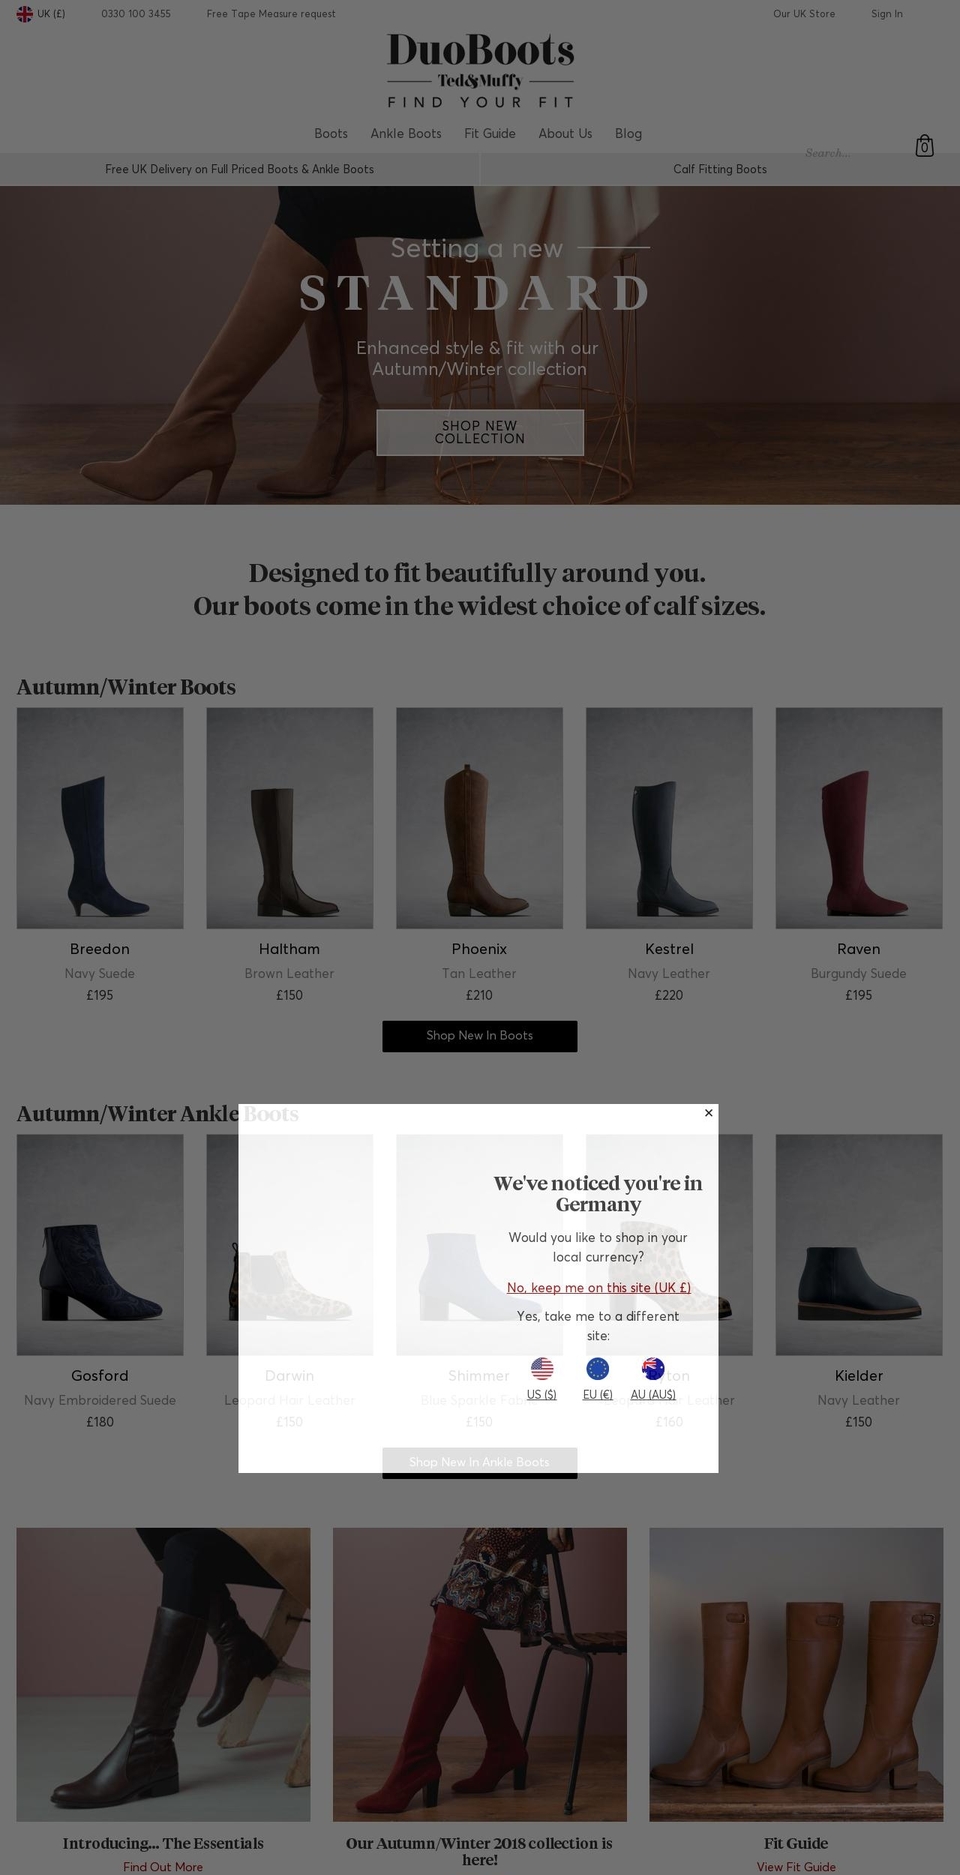 DuoBoots GBP V4.2 Shopify theme site example duoboots.shoes